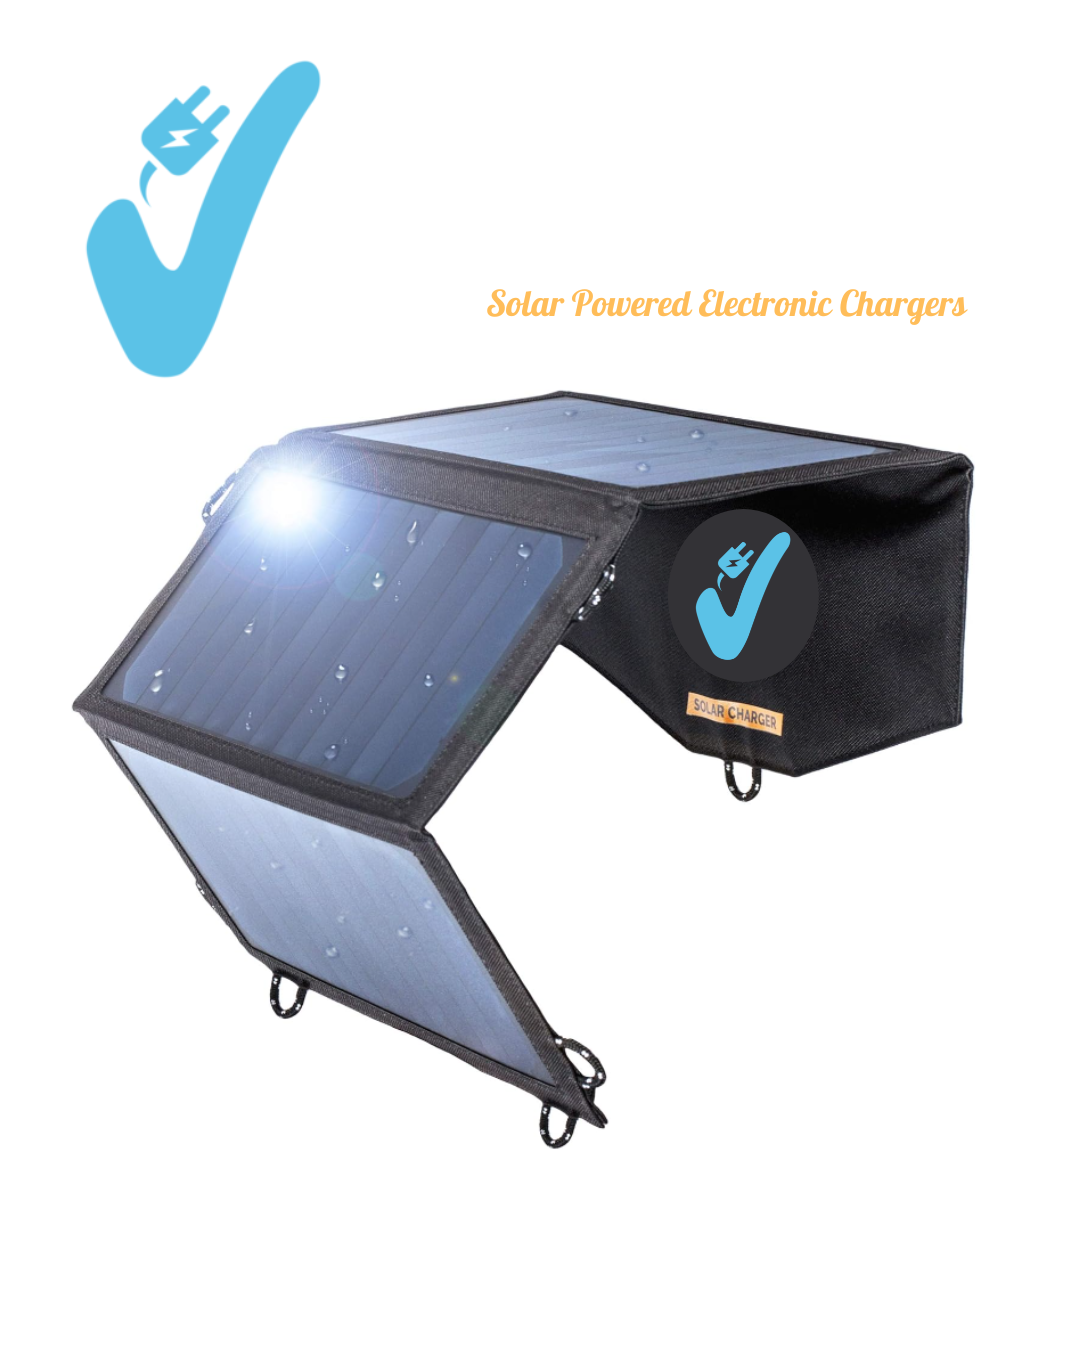 Solar powered electronic chargers